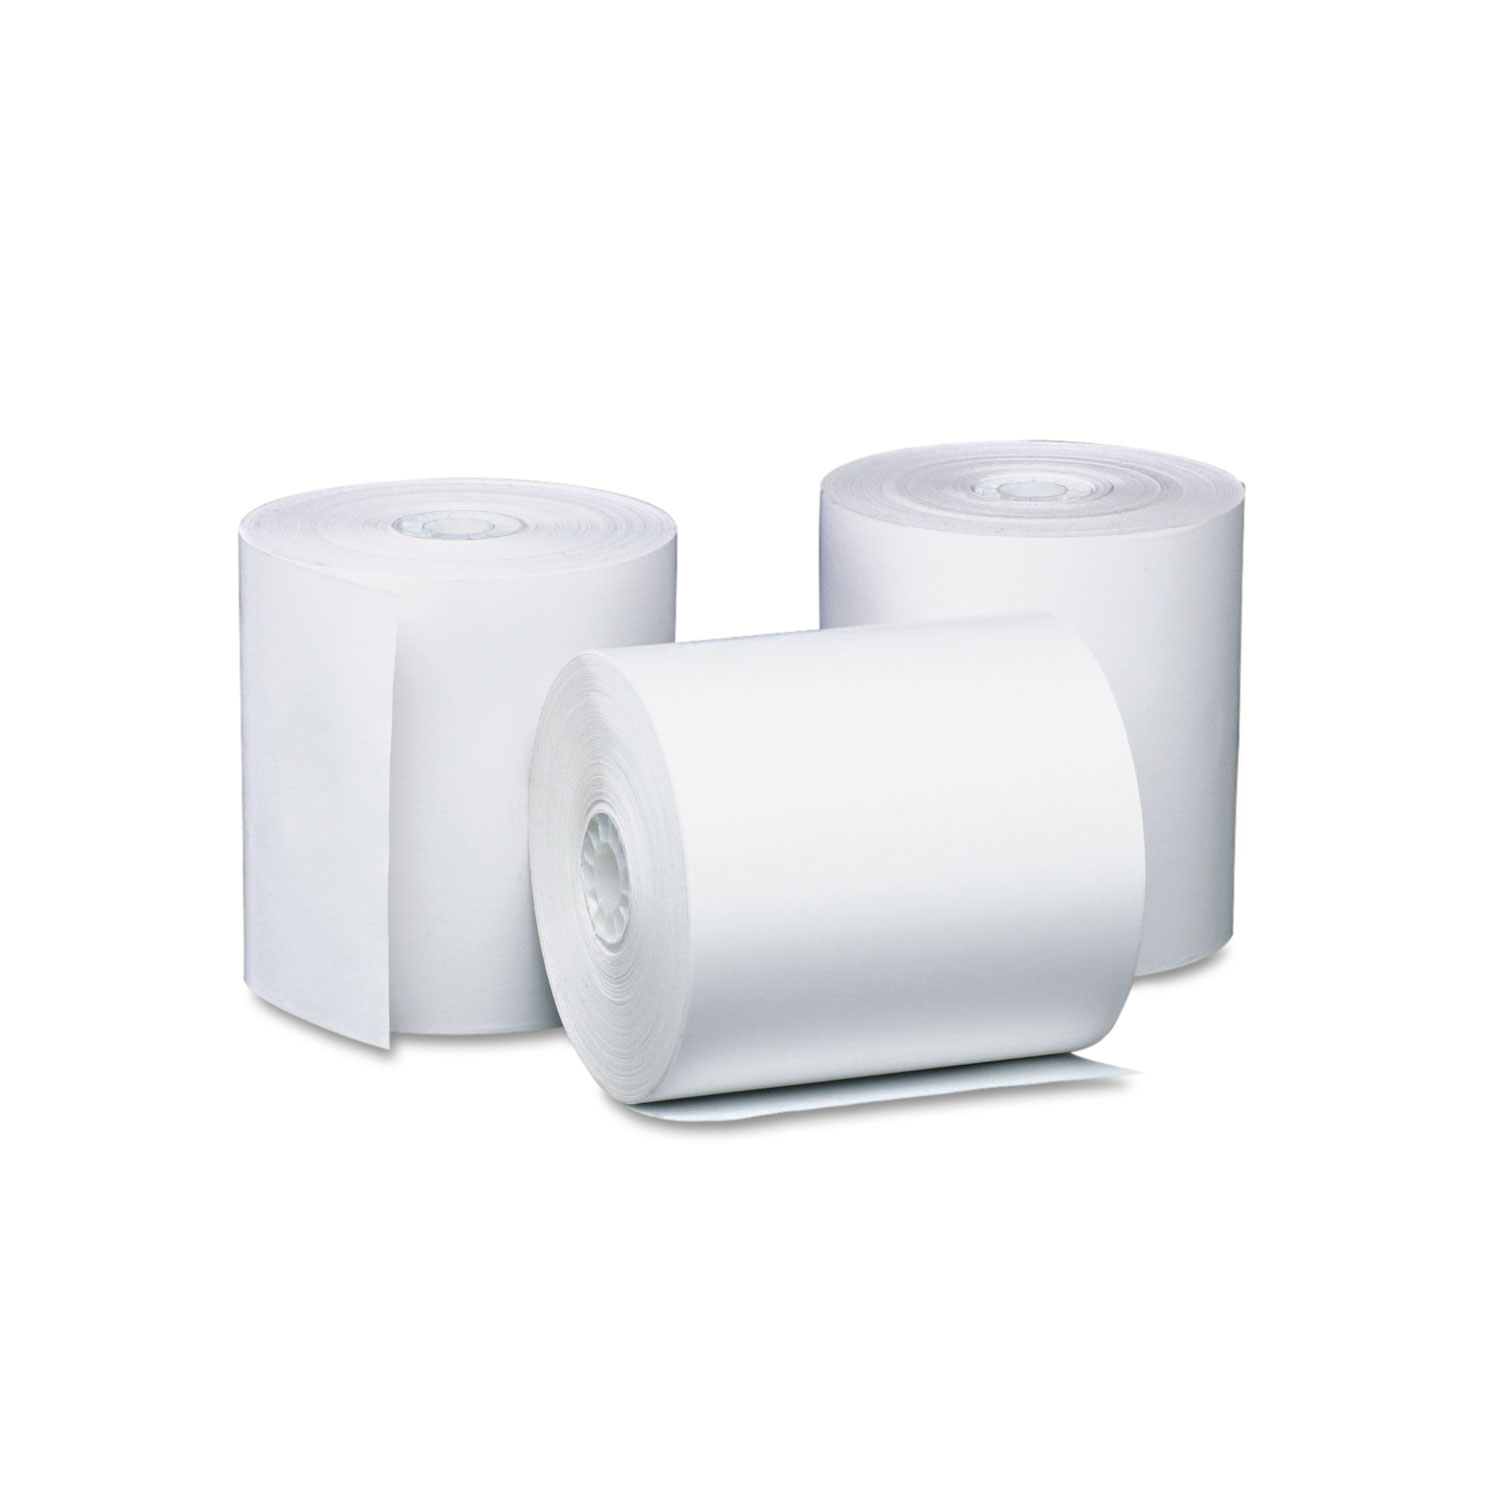  Iconex 05210 Direct Thermal Printing Thermal Paper Rolls, 3.13 x 119 ft, White, 50/Carton (ICX90783044) 